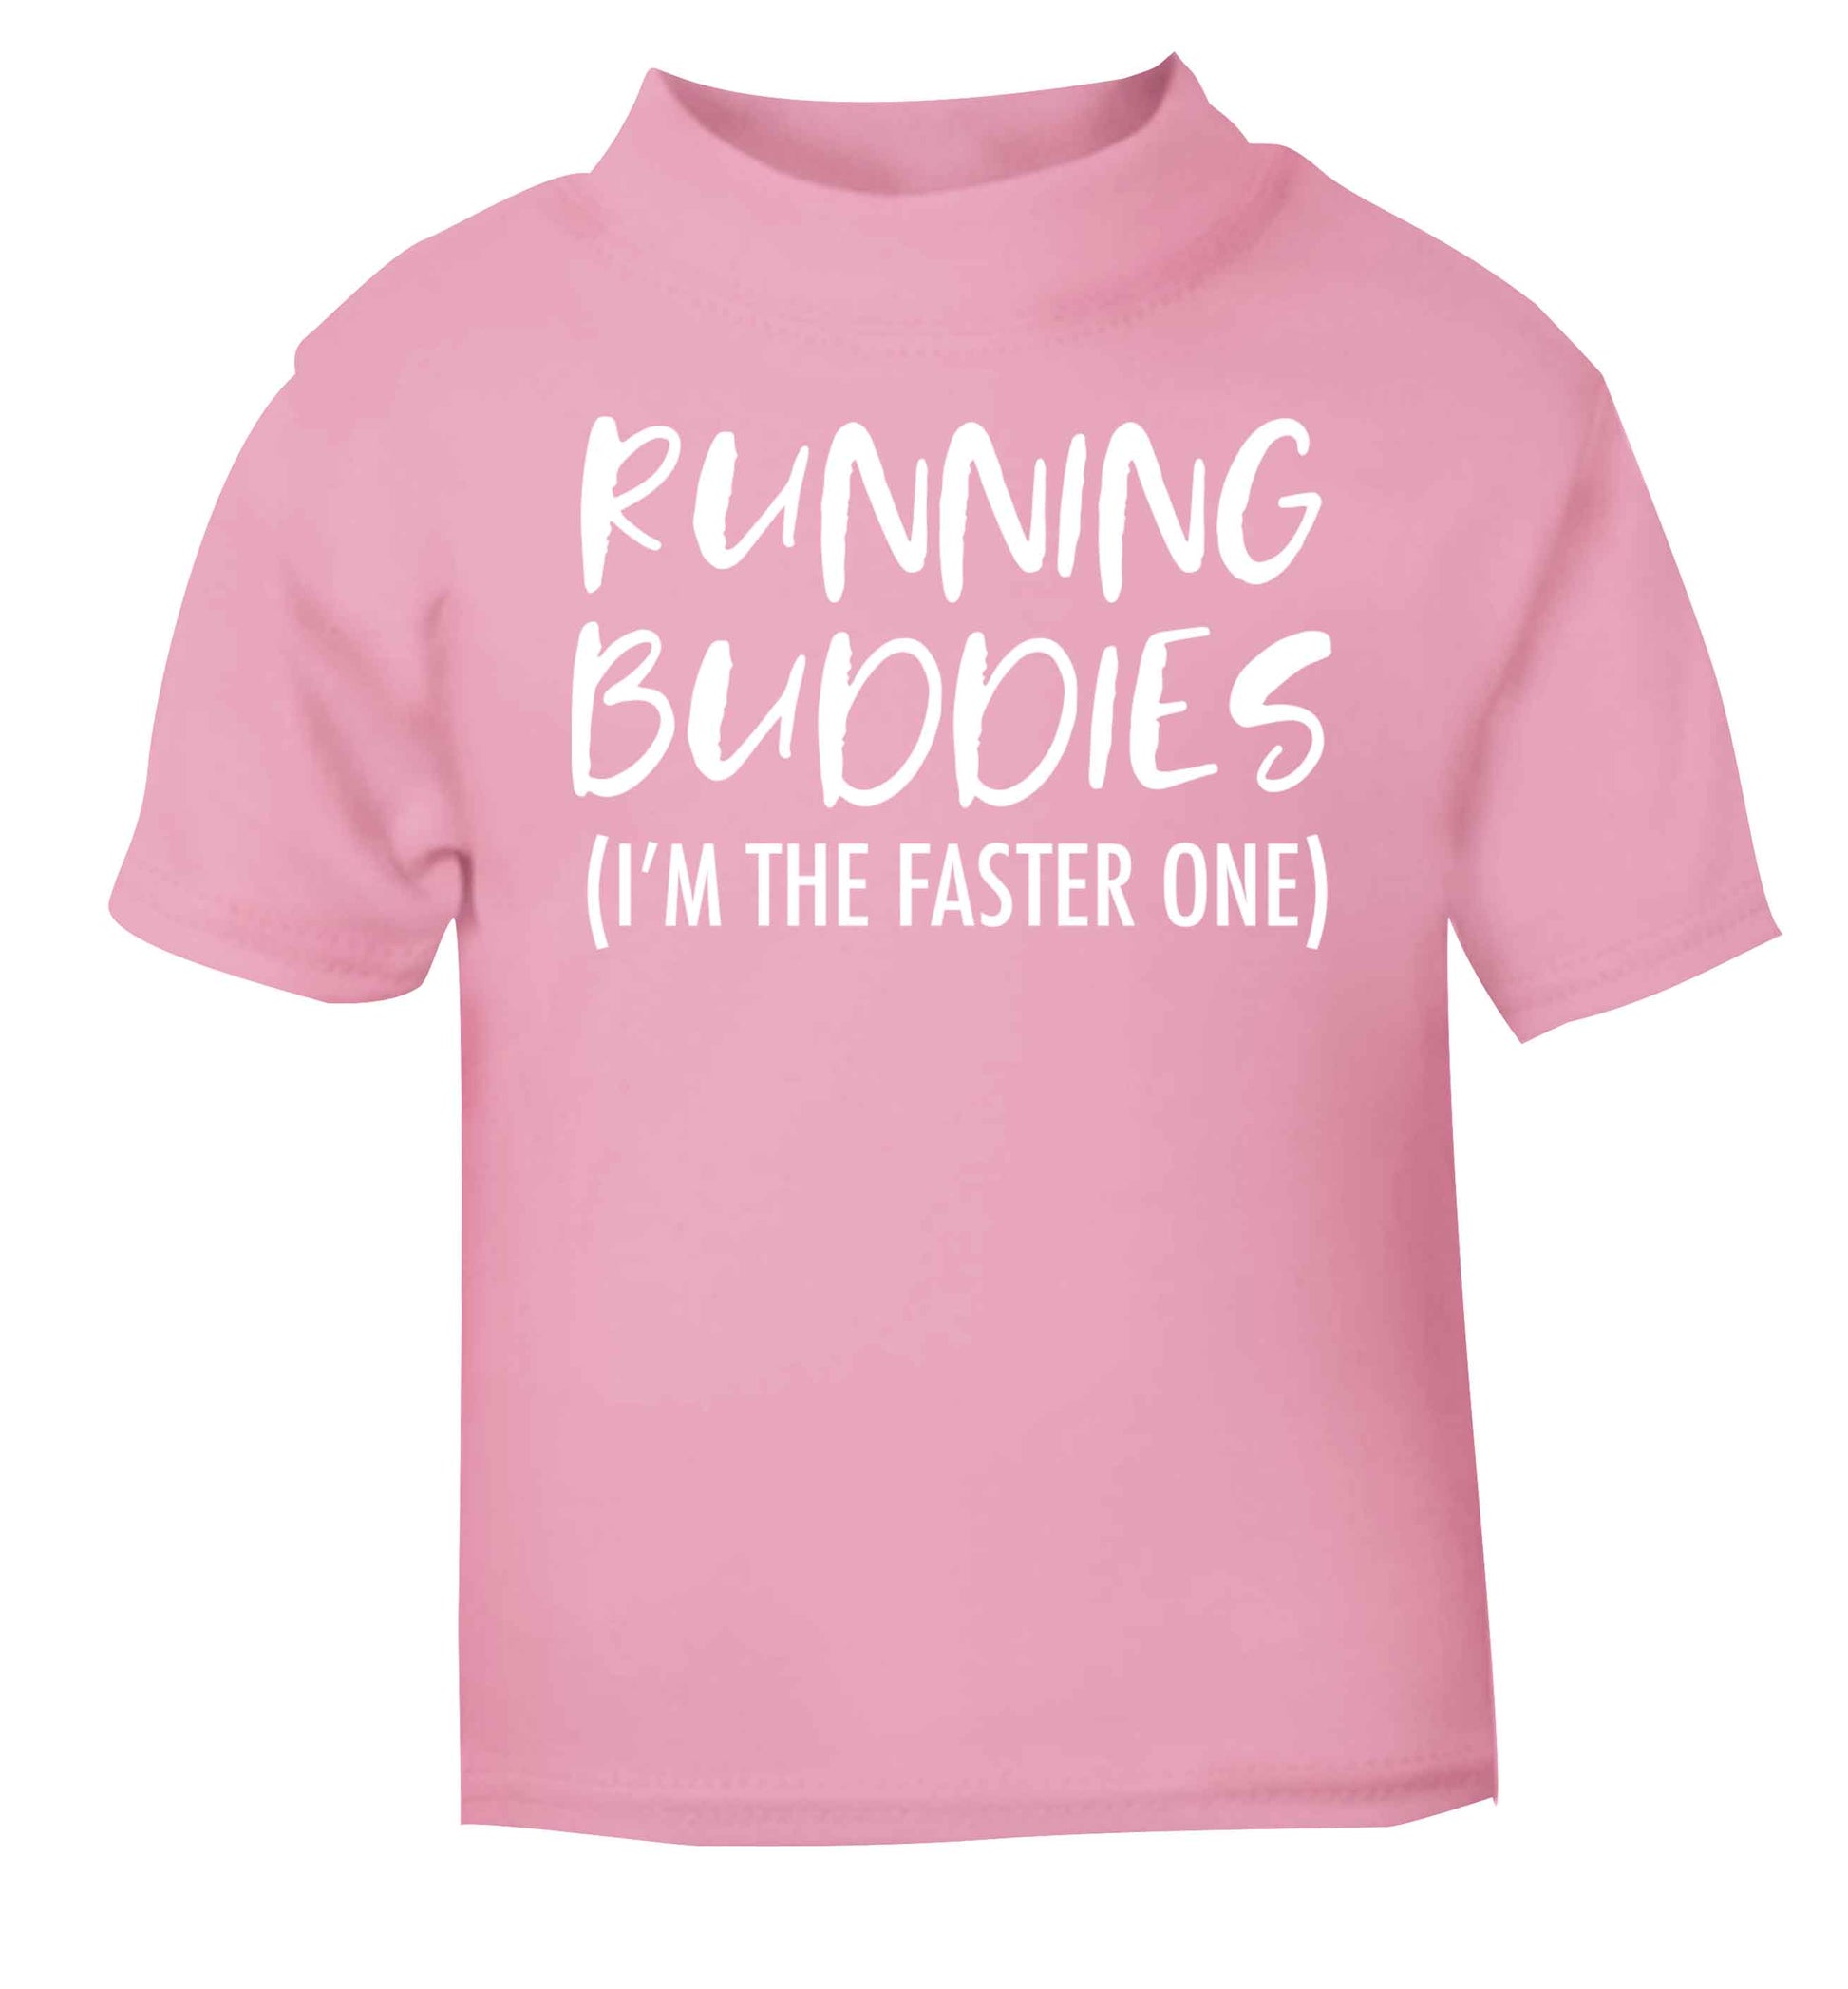 Running buddies (I'm the faster one) light pink baby toddler Tshirt 2 Years